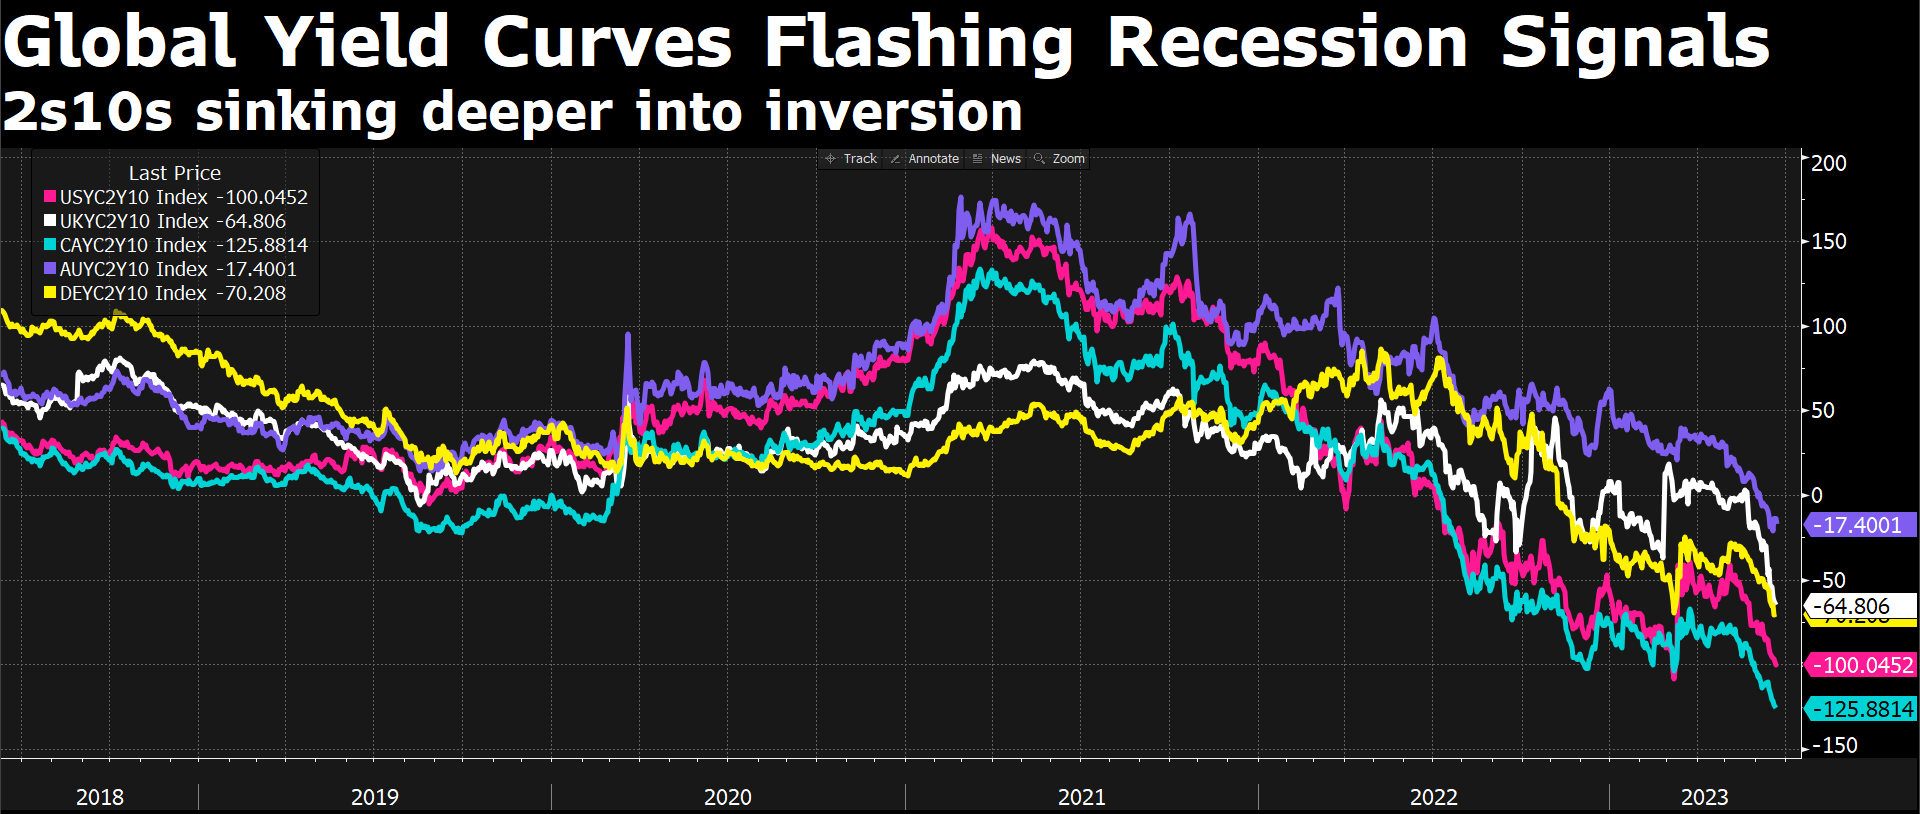 Global Yield Curves' (2s10s) inversion deepens, flashing recession signals